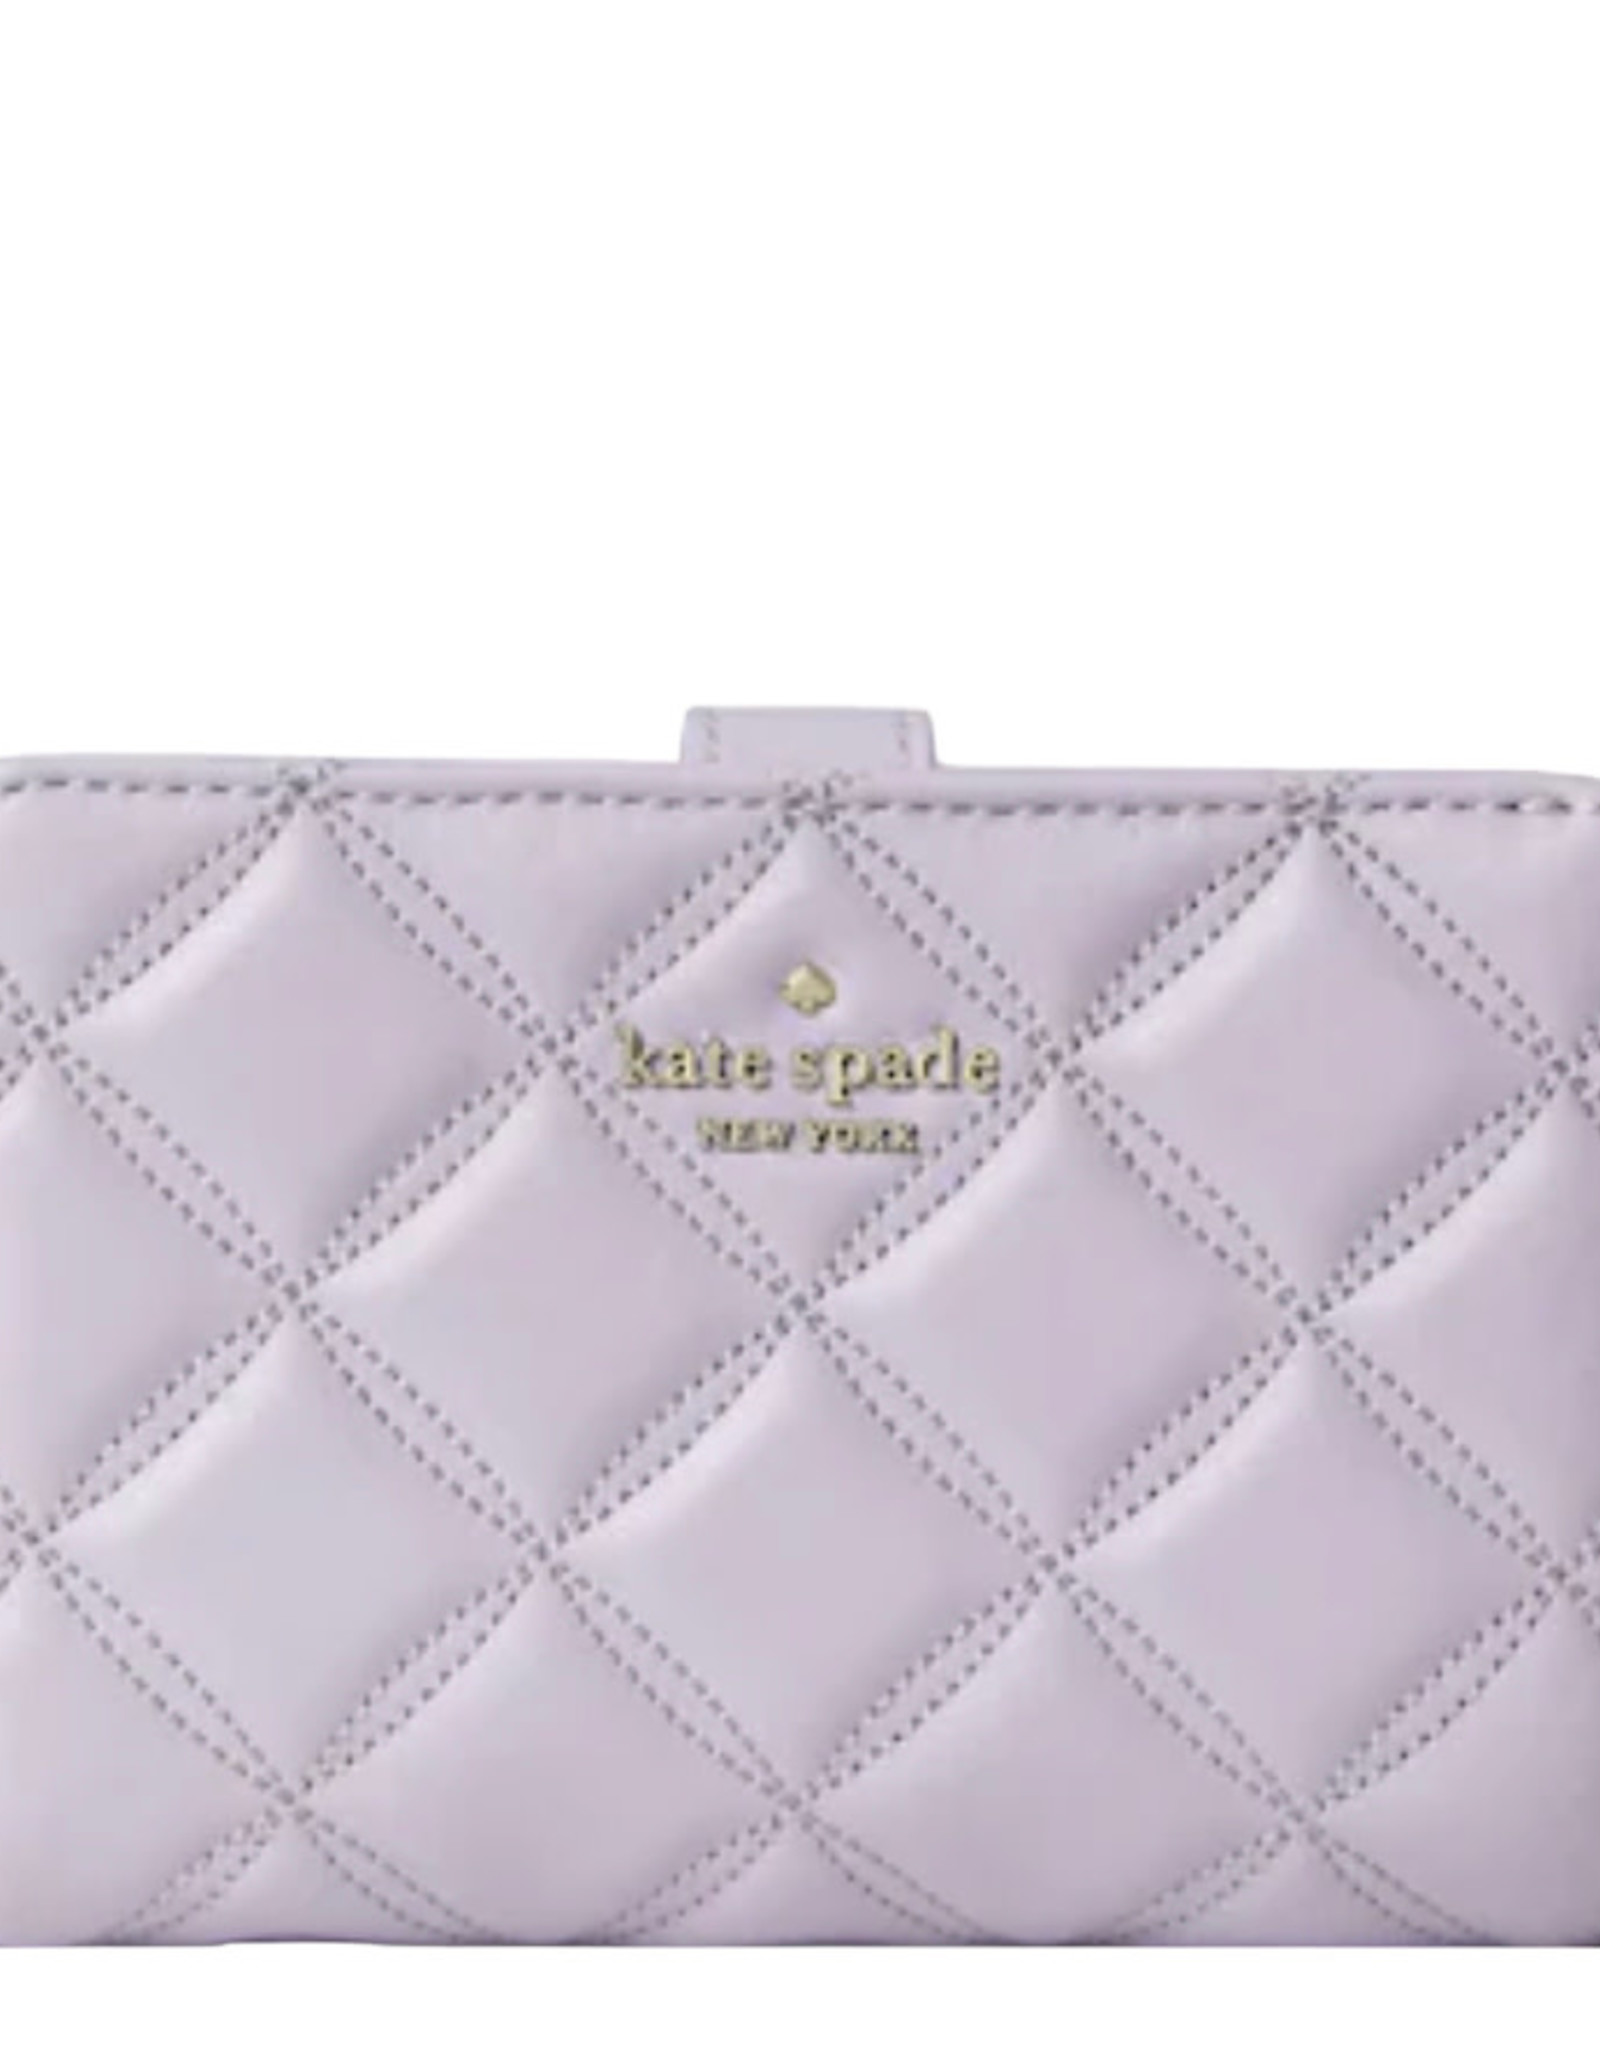 Kate Spade Kate Spade Medium Compact Bifold Wallet Smooth Quilted Leather  Natalia